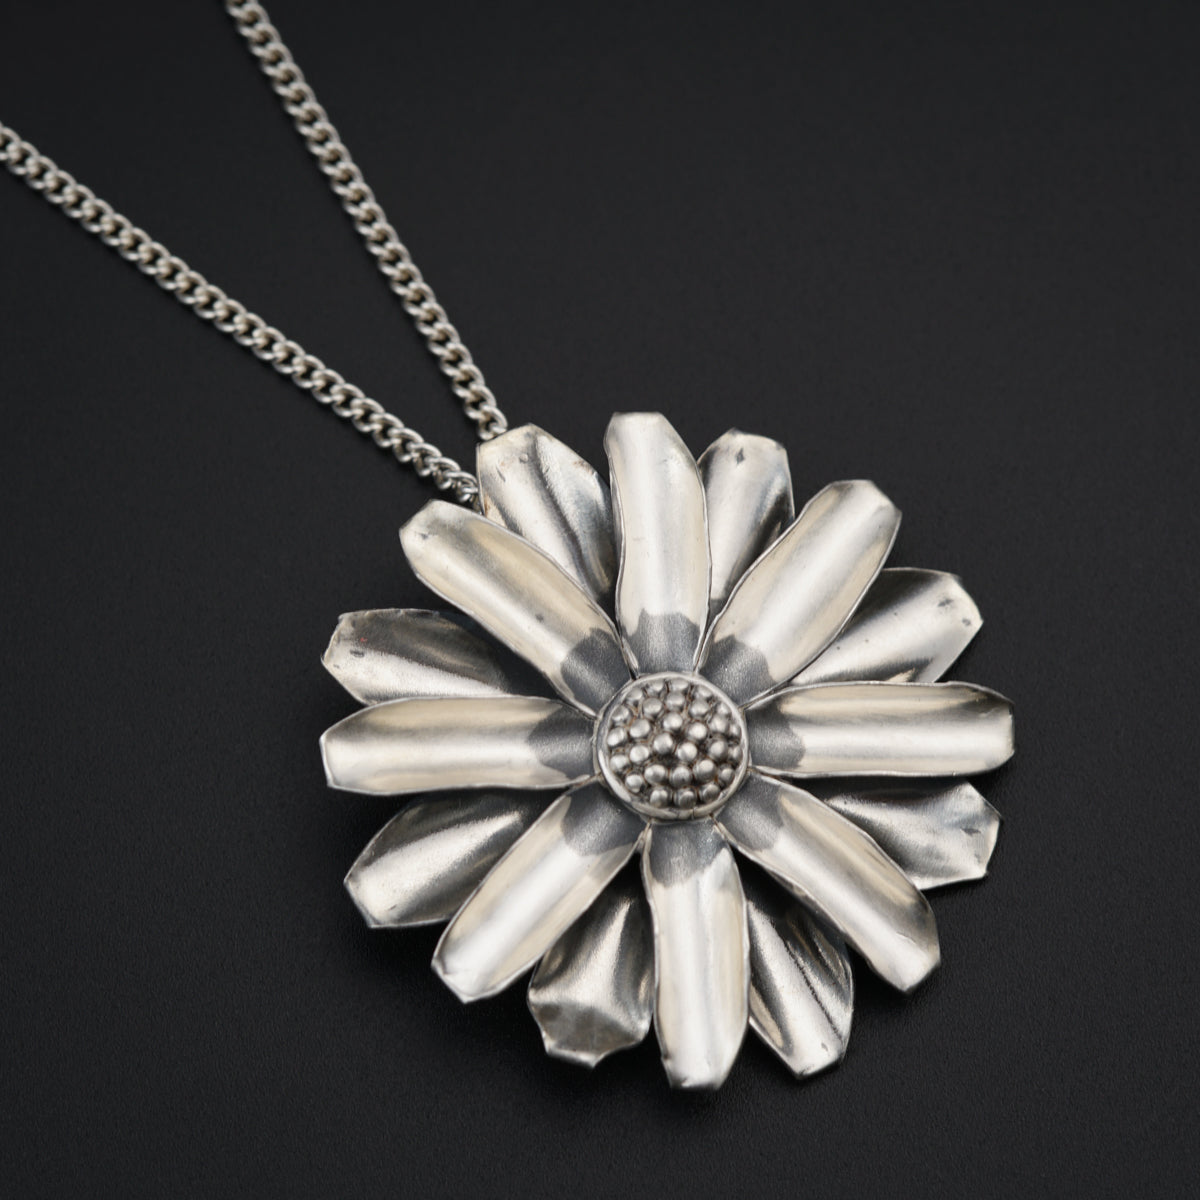 a silver flower pendant on a chain